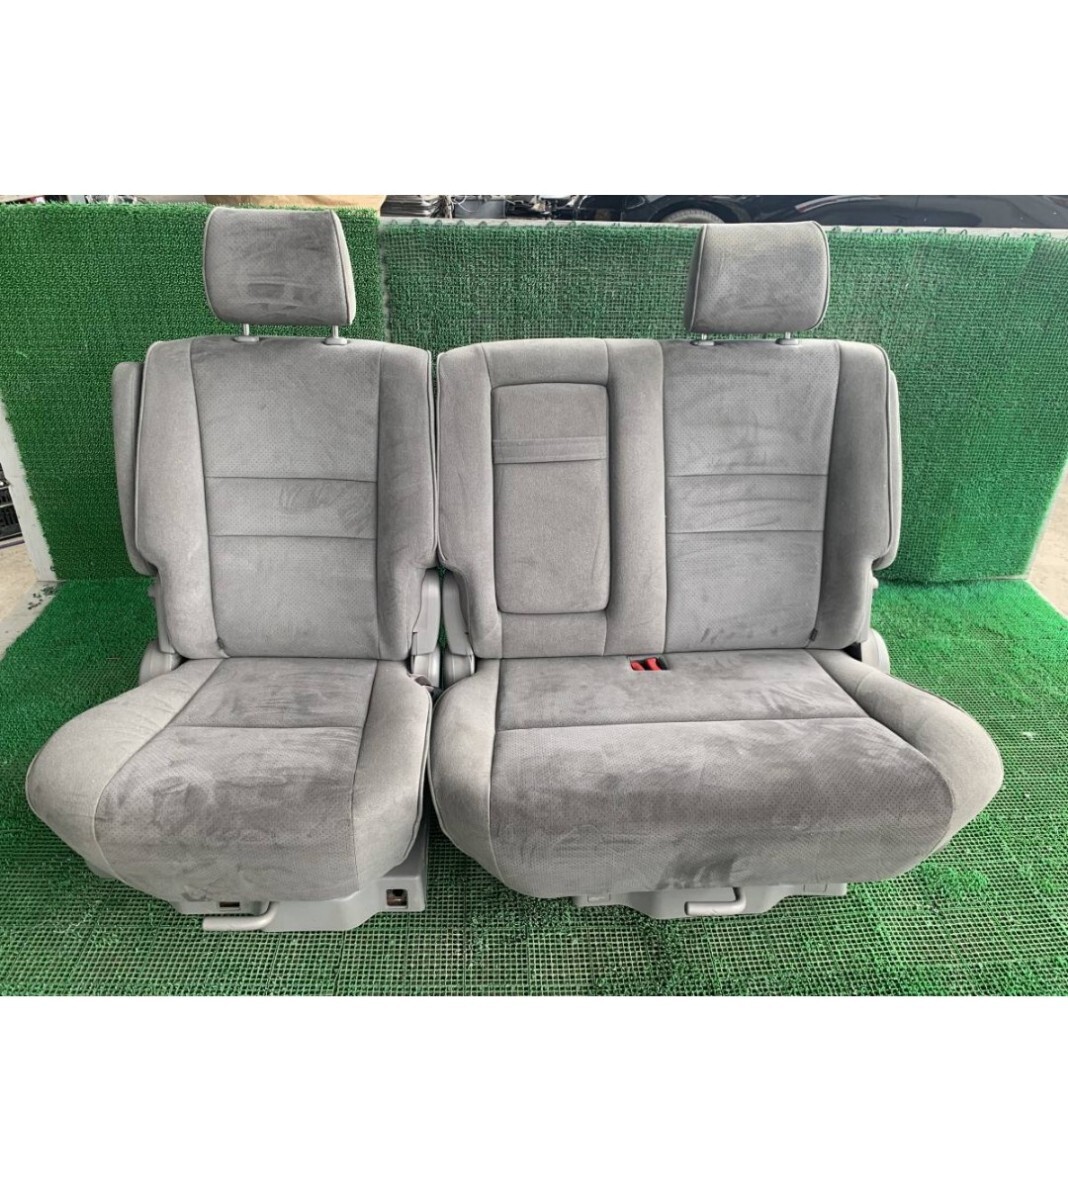  selling out * selling out * final product immediate payment rom and rear (before and after) adjustment possible *200 series Hiace narrow S-GL DX frame pedestal 10 Alphard for seat installation pedestal * postage extra 